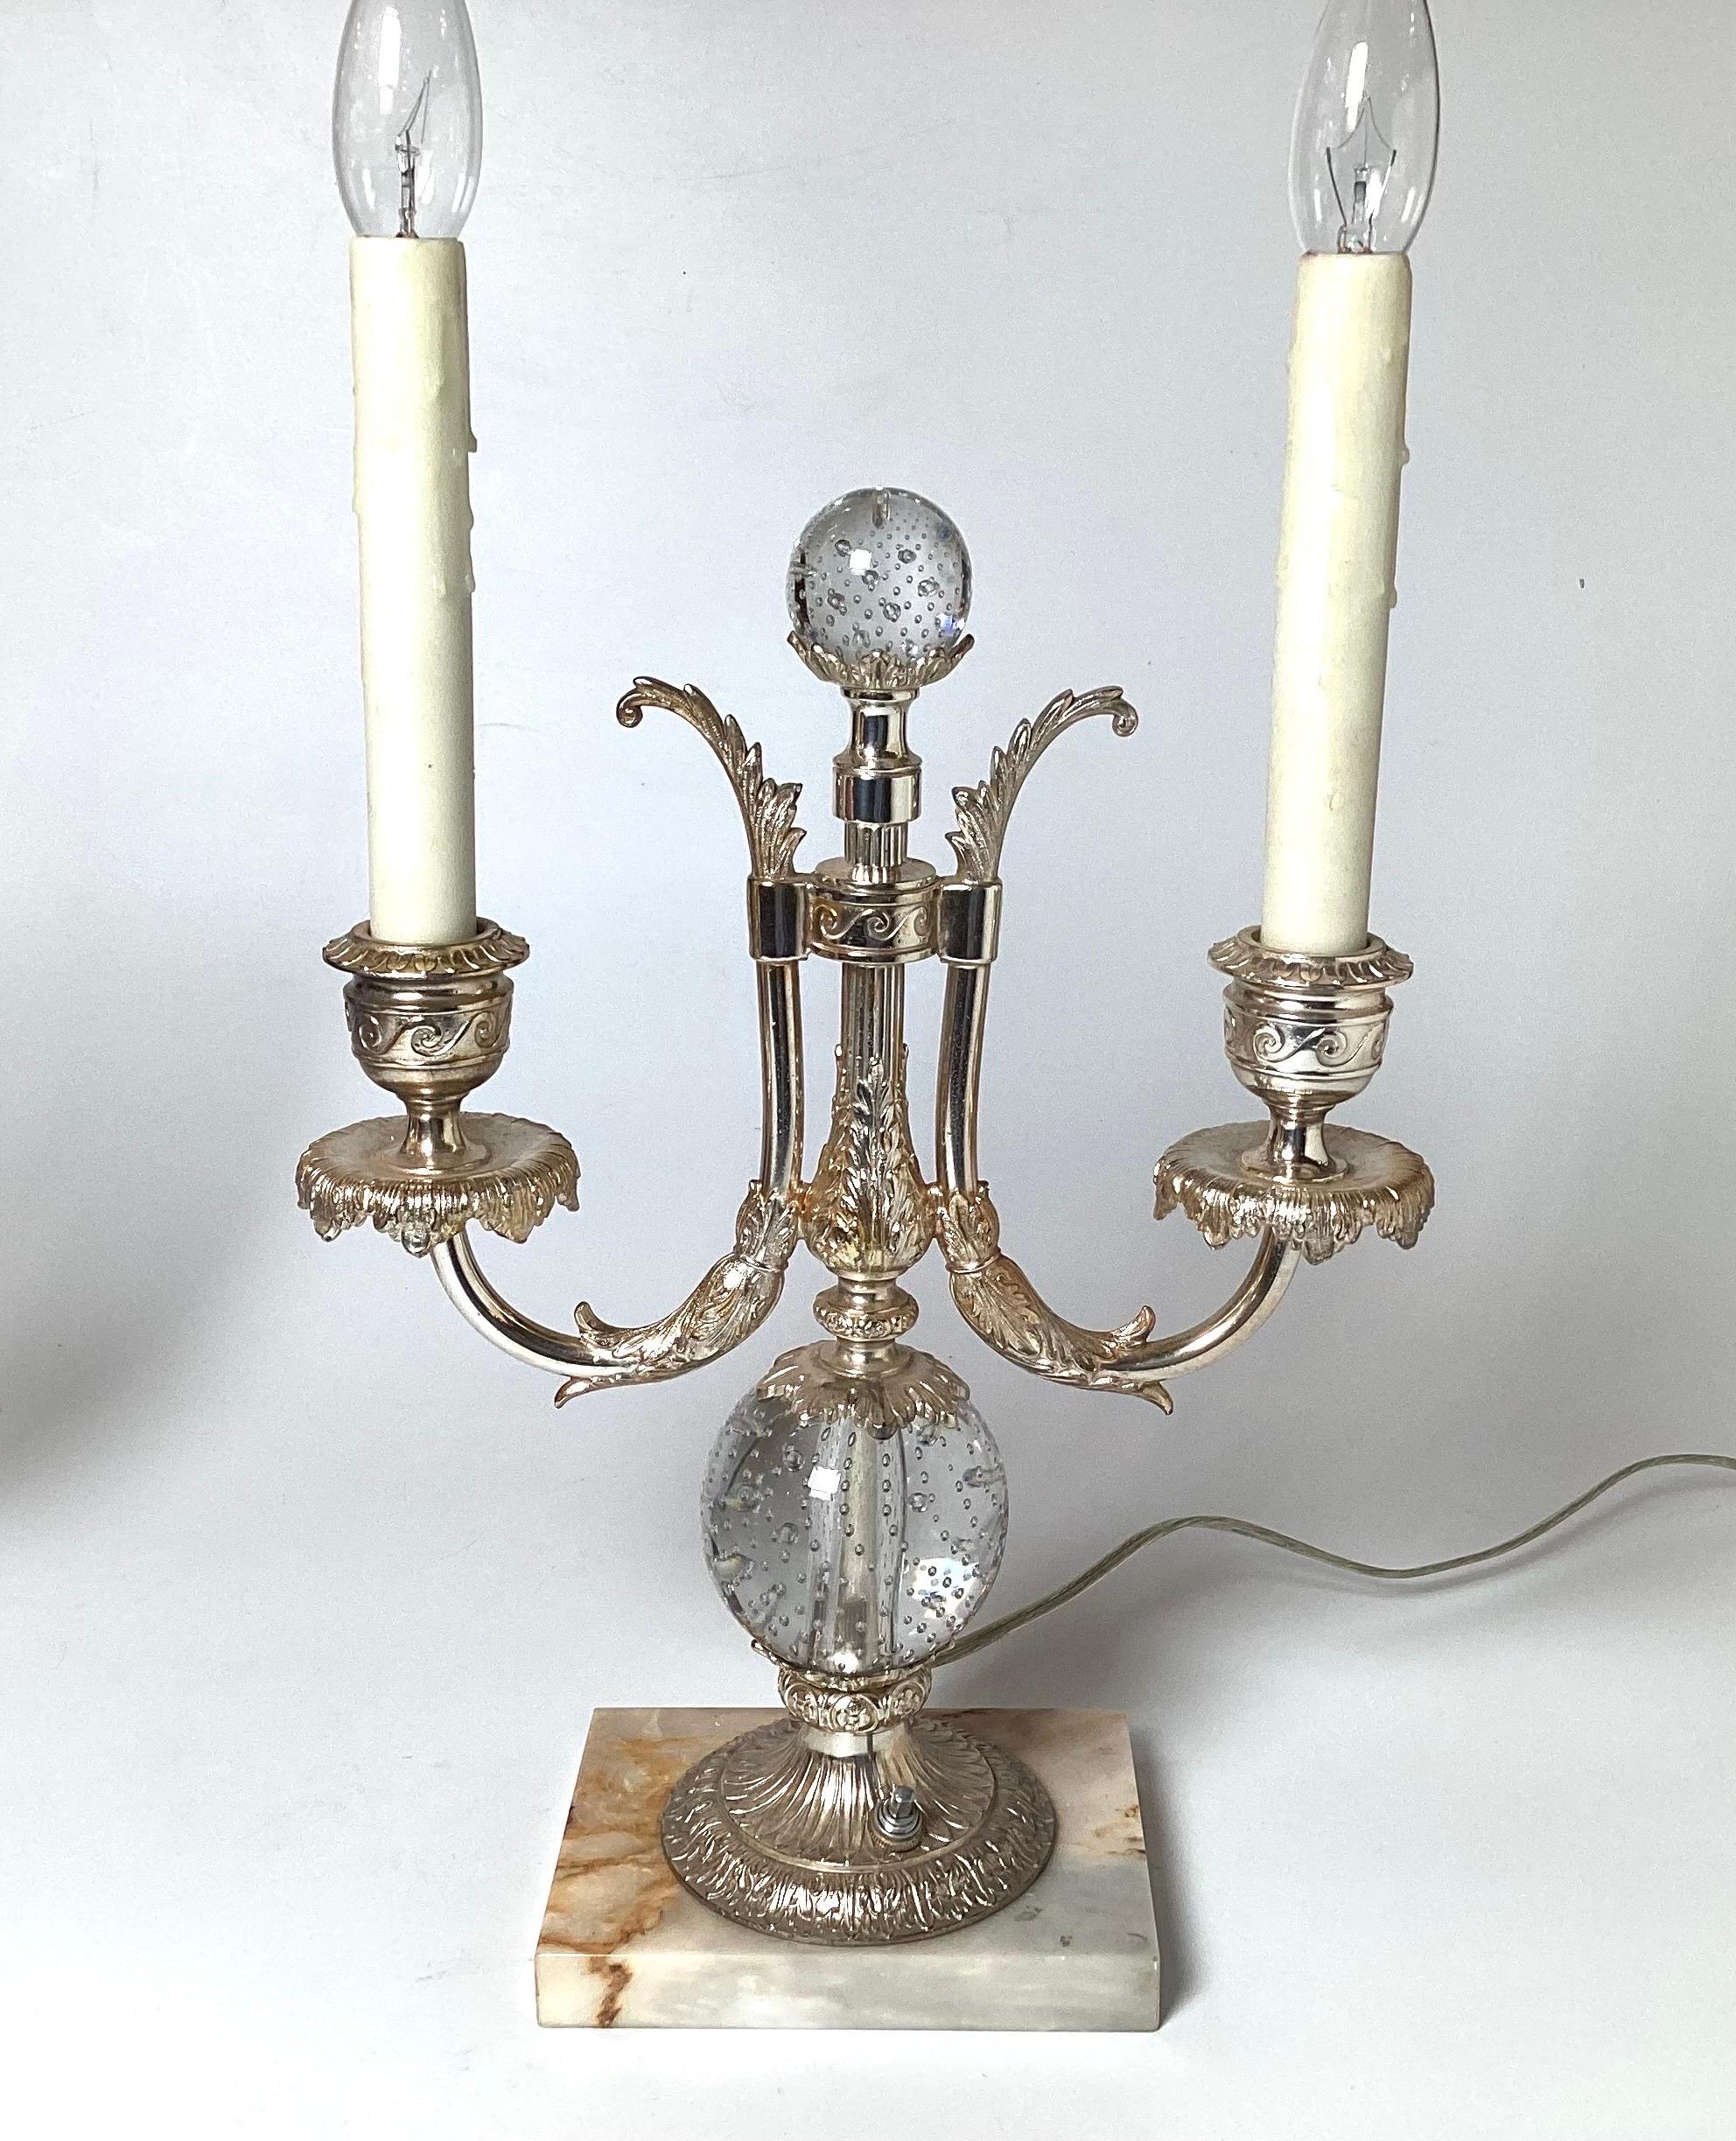 Pair of Silvered Bronze Candelabra Lamps by Pairpoint In Good Condition For Sale In Lambertville, NJ